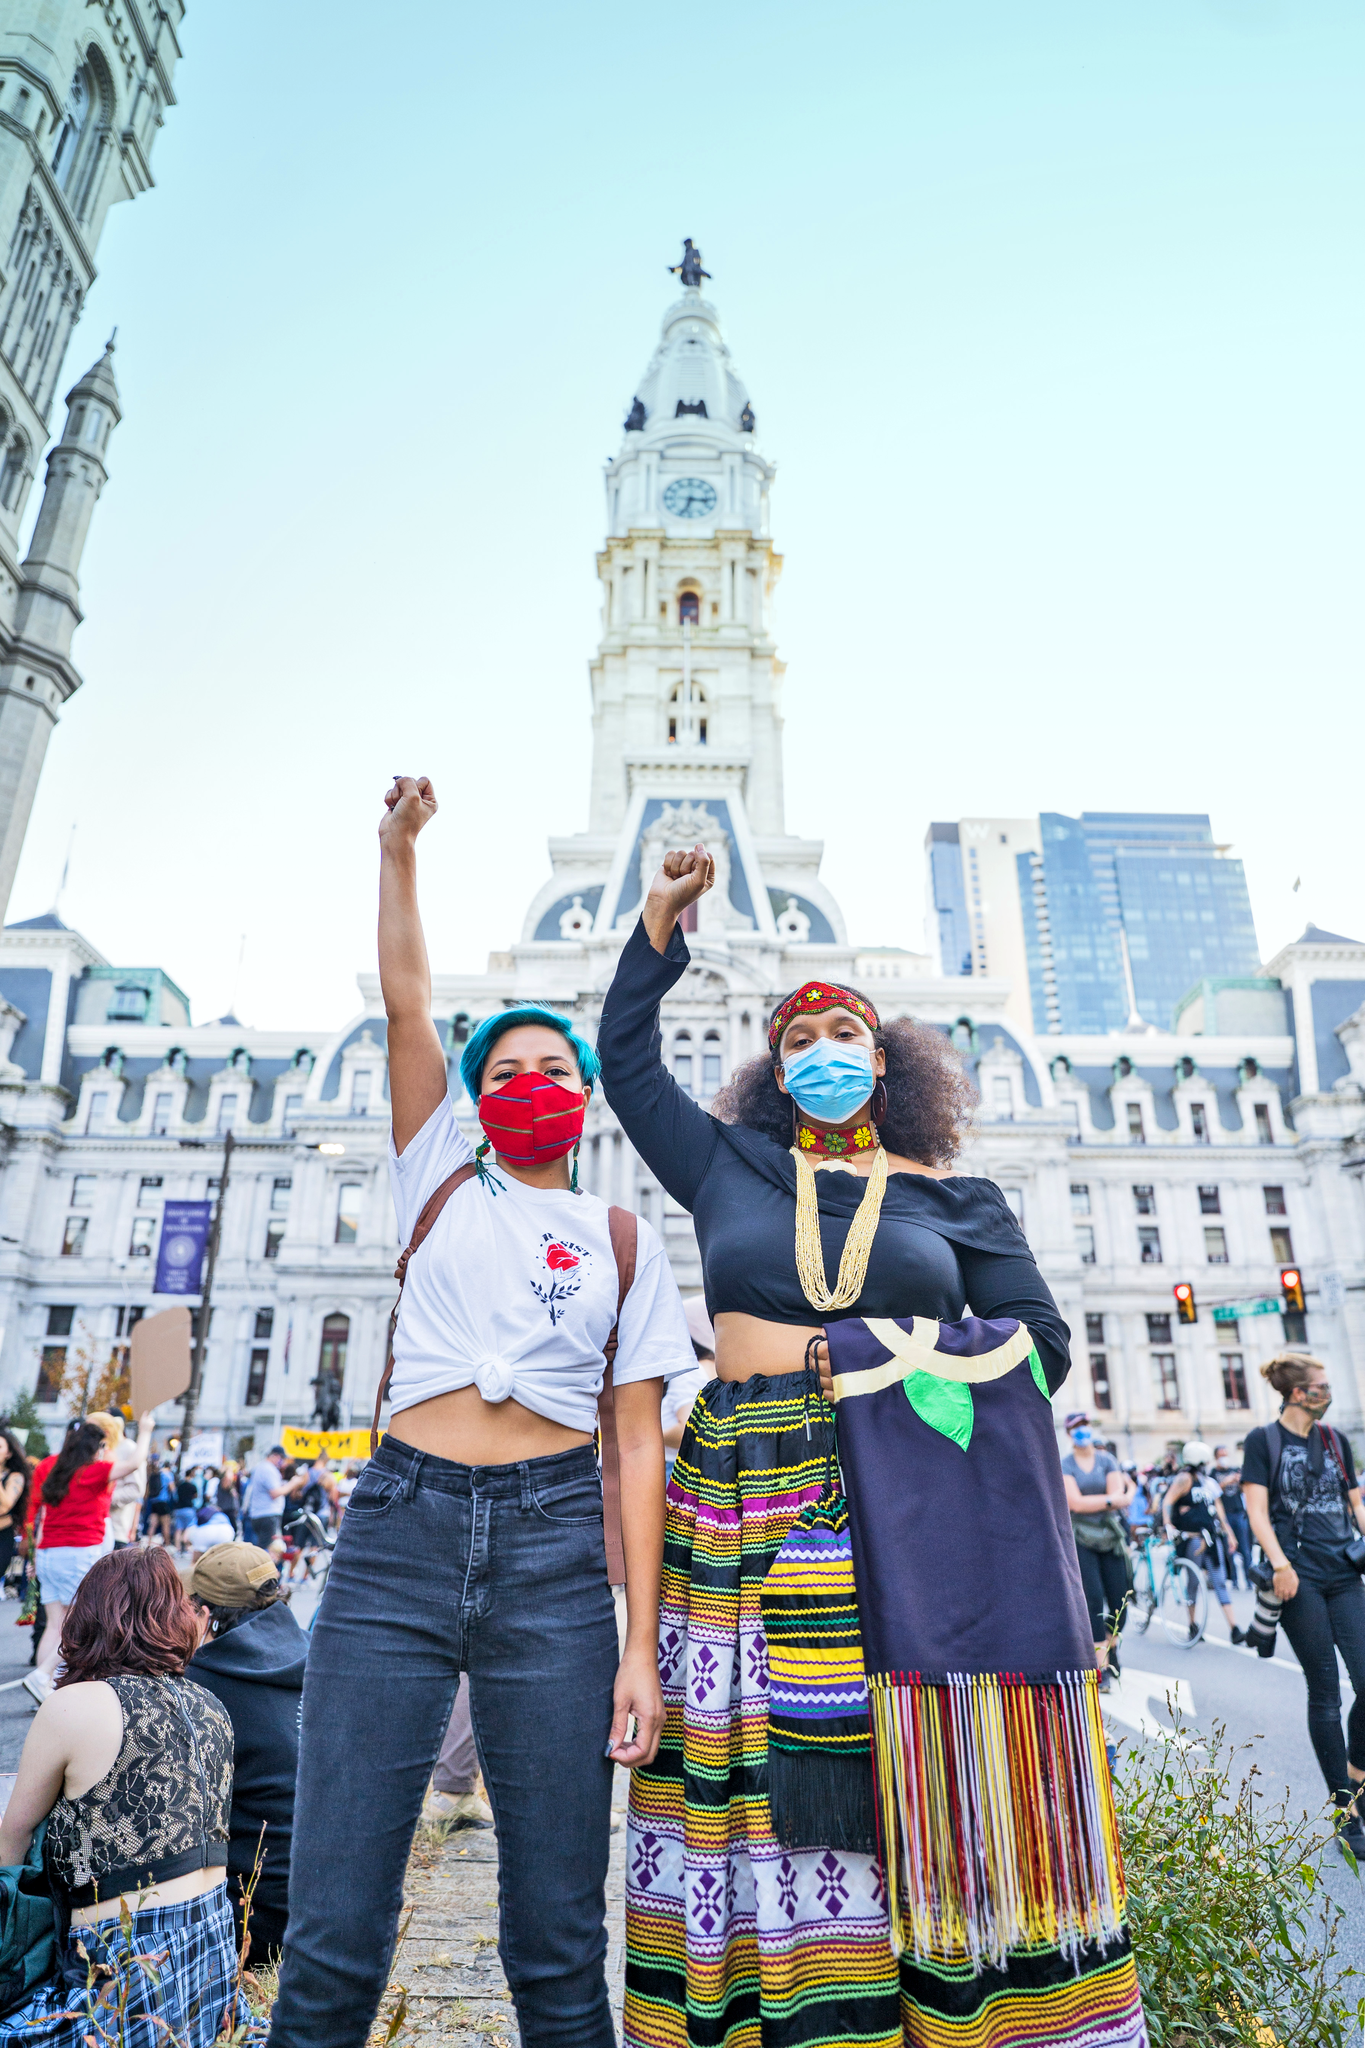 From left: Cindy M. Ngo and Cheyanne L. Elam celebrate the results of the 2020 presidential election in front of City Hall. Photography by Drew Dennis.